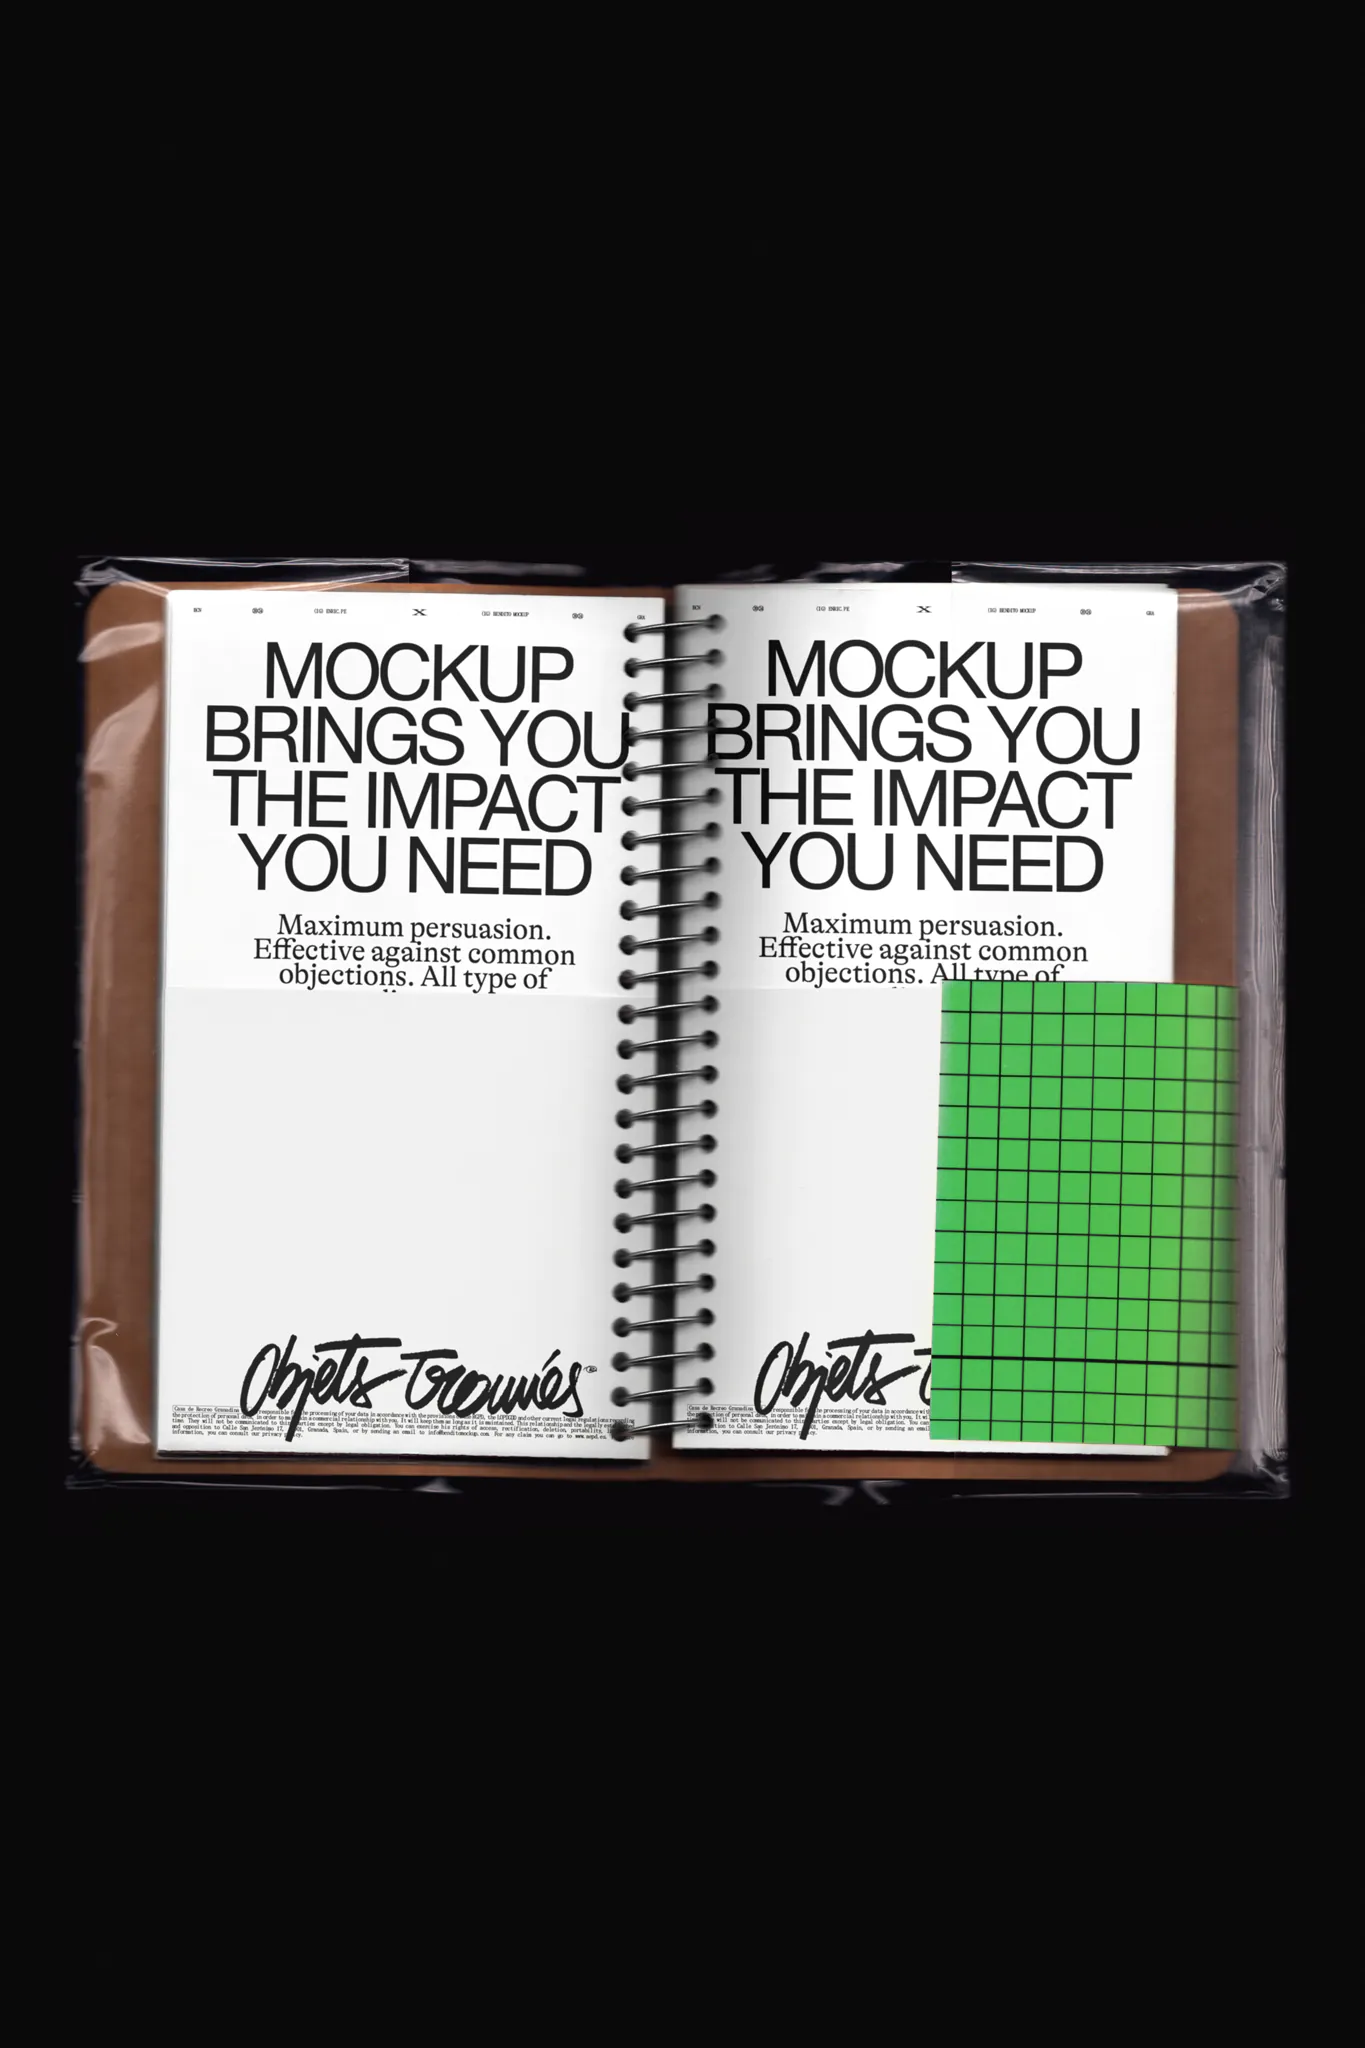 Open notebook mockup with a yellow sticker on top, mockup of an open notebook wrapped in a plastic bag, mockup of a cardboard notebook, scanned notebook mockup, scanned book mockup, high quality mockup, PSD editable file.